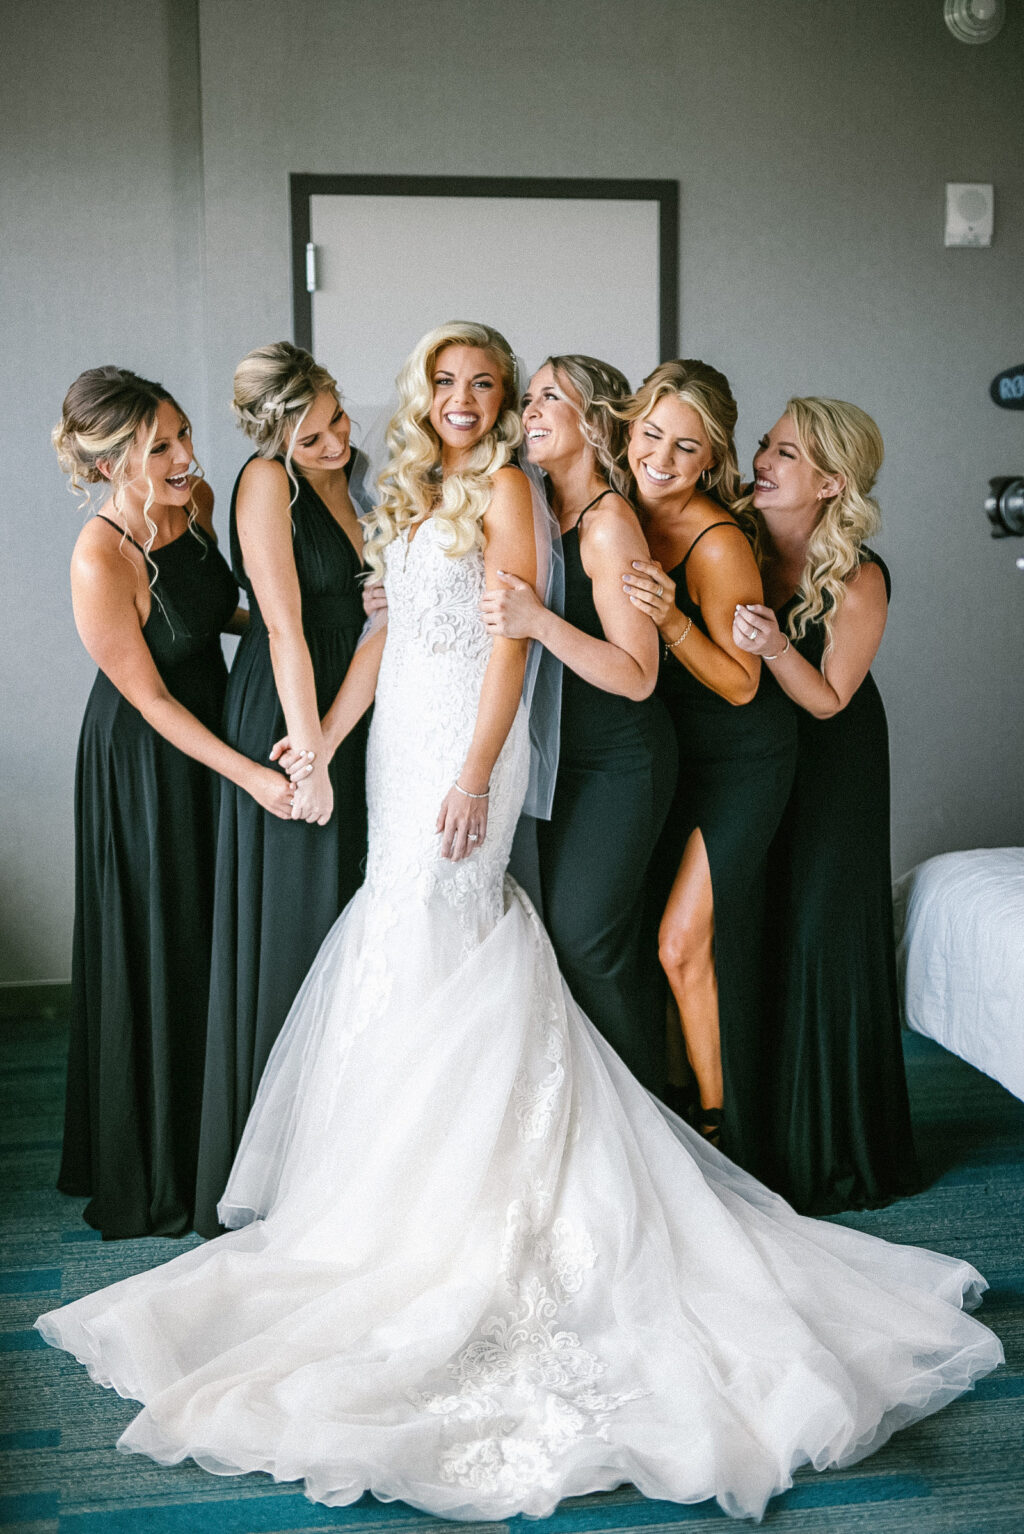 Modern Elegant Florida Bride in Romantic Lace and Tulle Skirt Mermaid Maggie Soterro Wedding Dress with Bridesmaids in Mix and Match Black Dresses | Tampa Bay Wedding Hair and Makeup Femme Akoi Beauty Studio